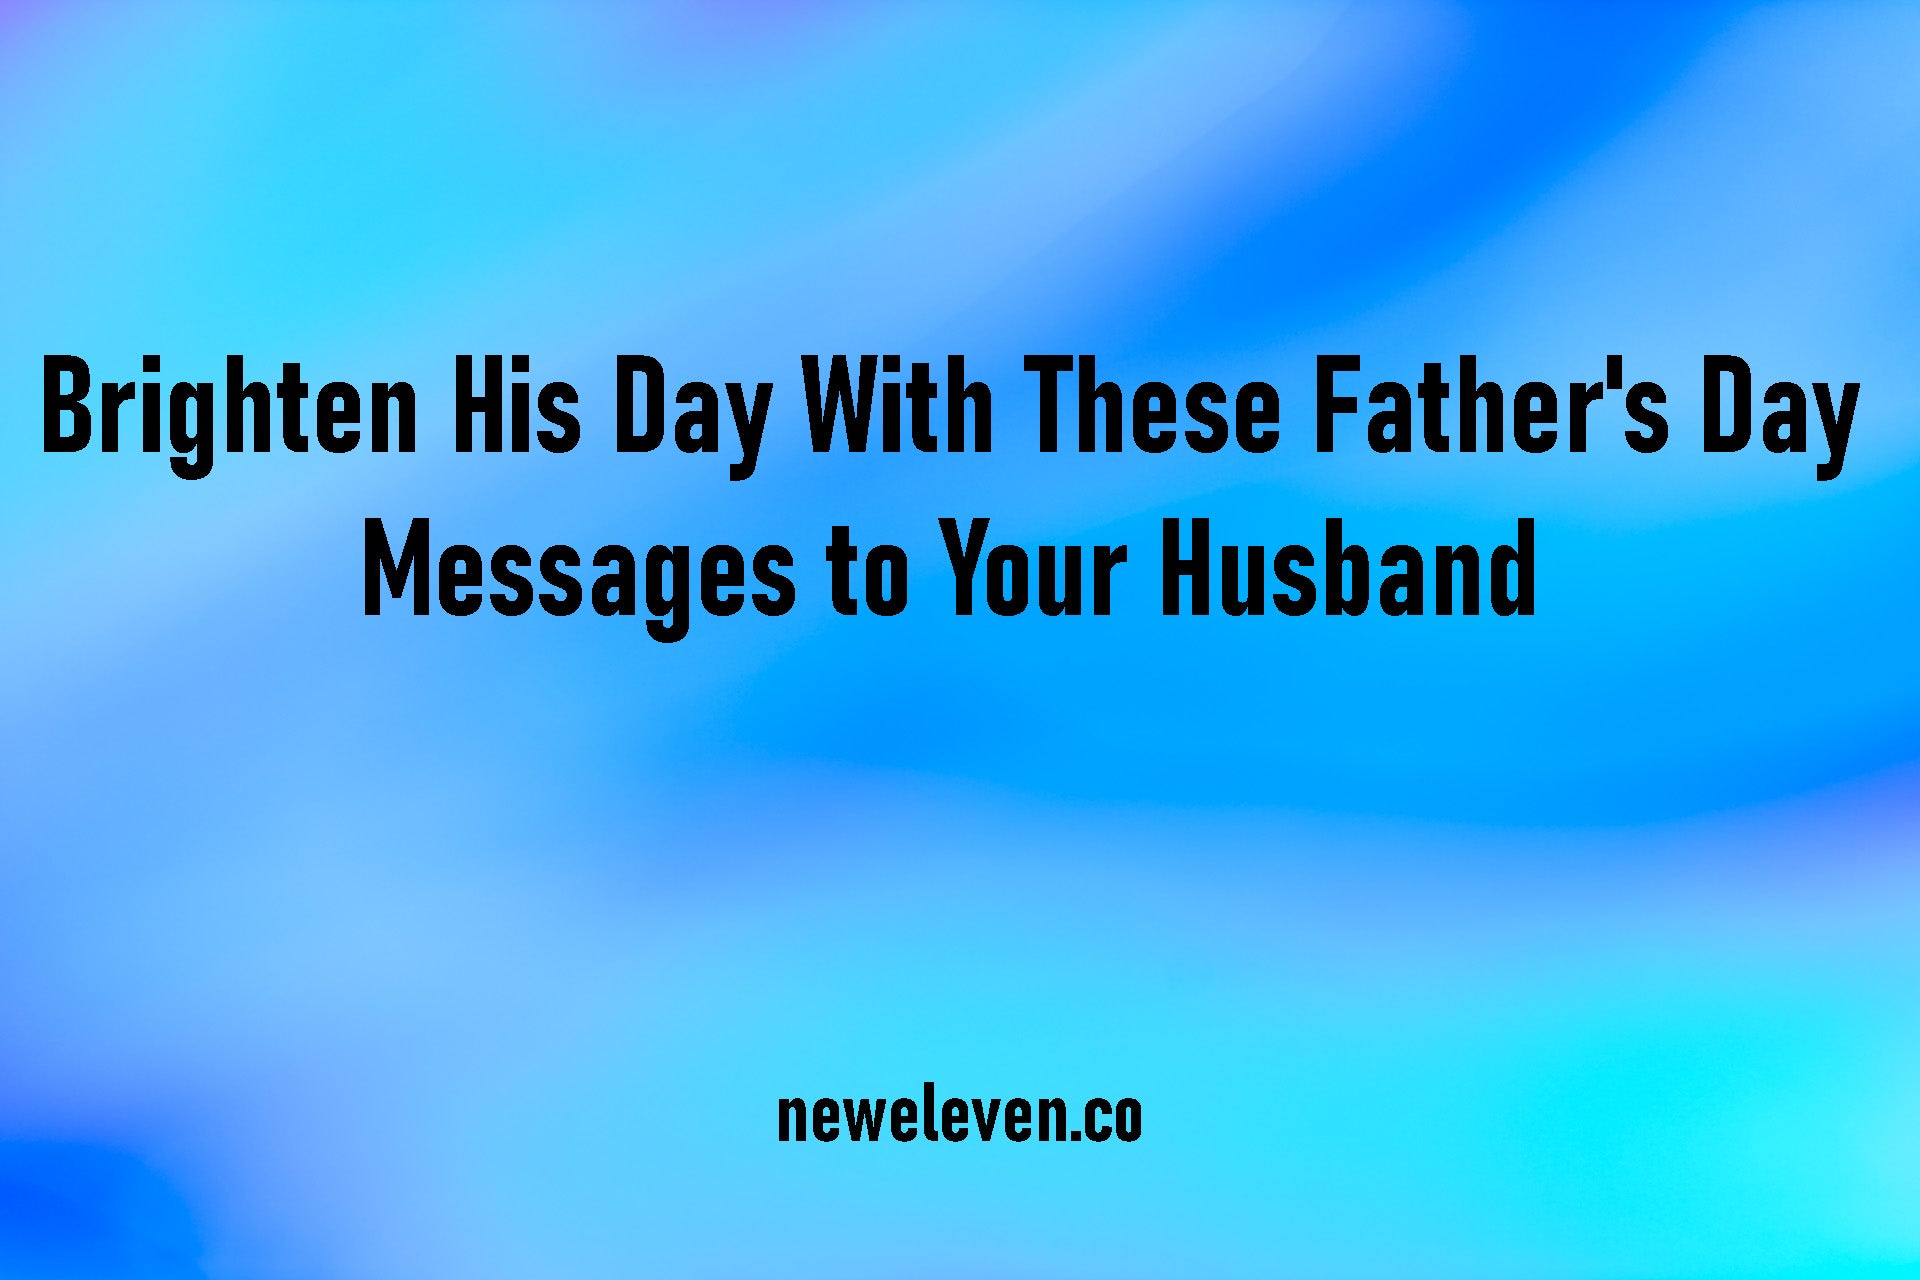 Brighten His Day With These Father's Day Messages to Your Father